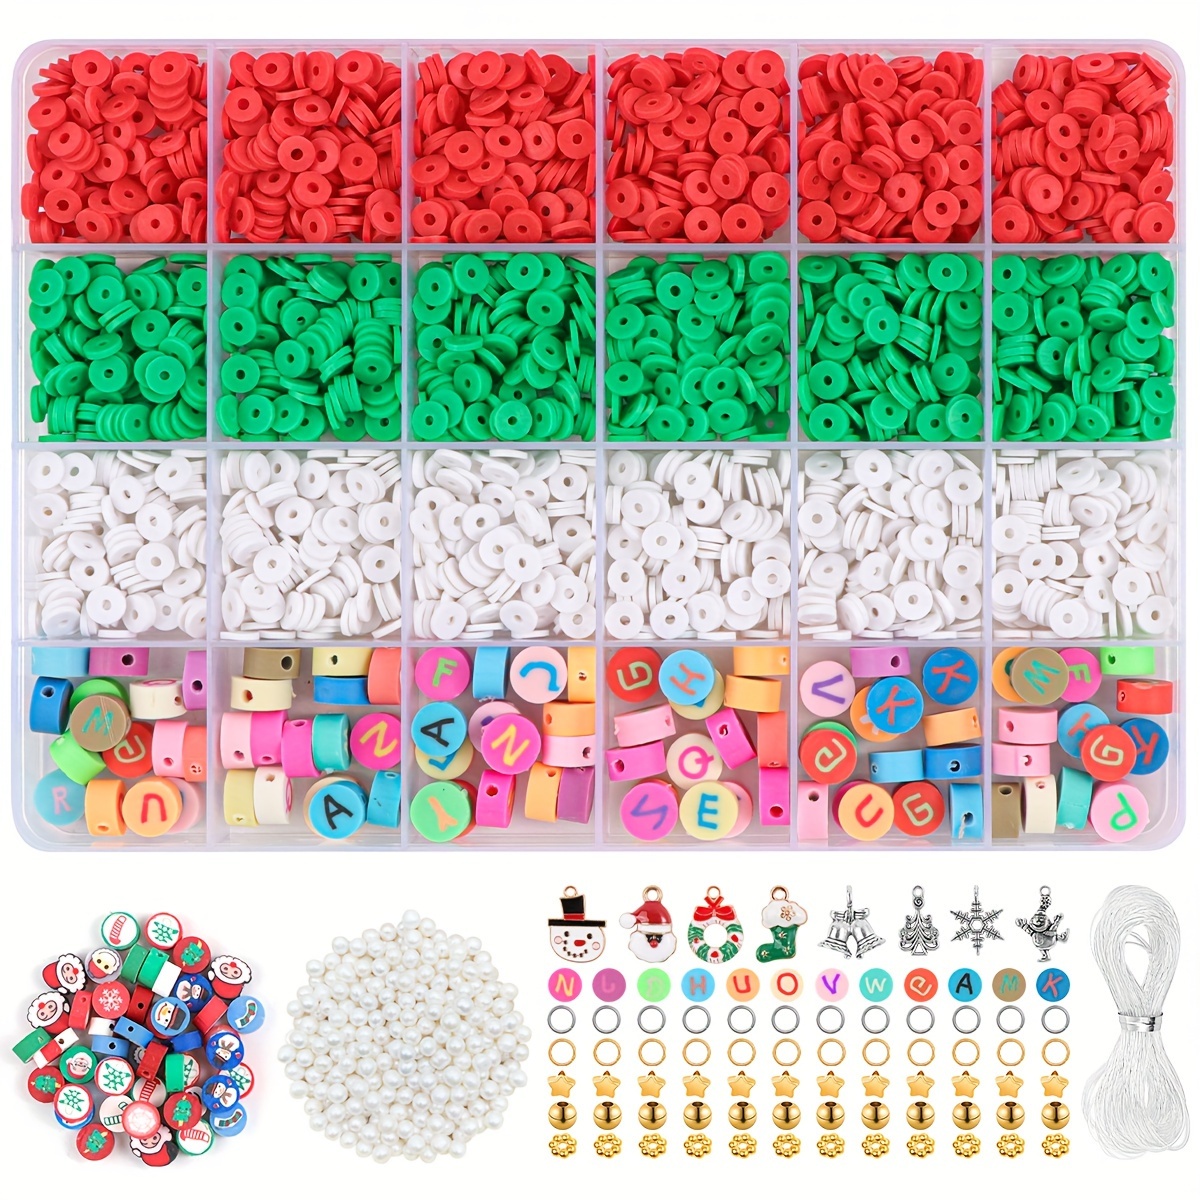  TXIN 200 Pieces Christmas Polymer Clay Beads Charms for  Bracelets Making 10MM Polymer Clay Spacer Beads for DIY Bracelet Necklace  Jewelry Making : Arts, Crafts & Sewing